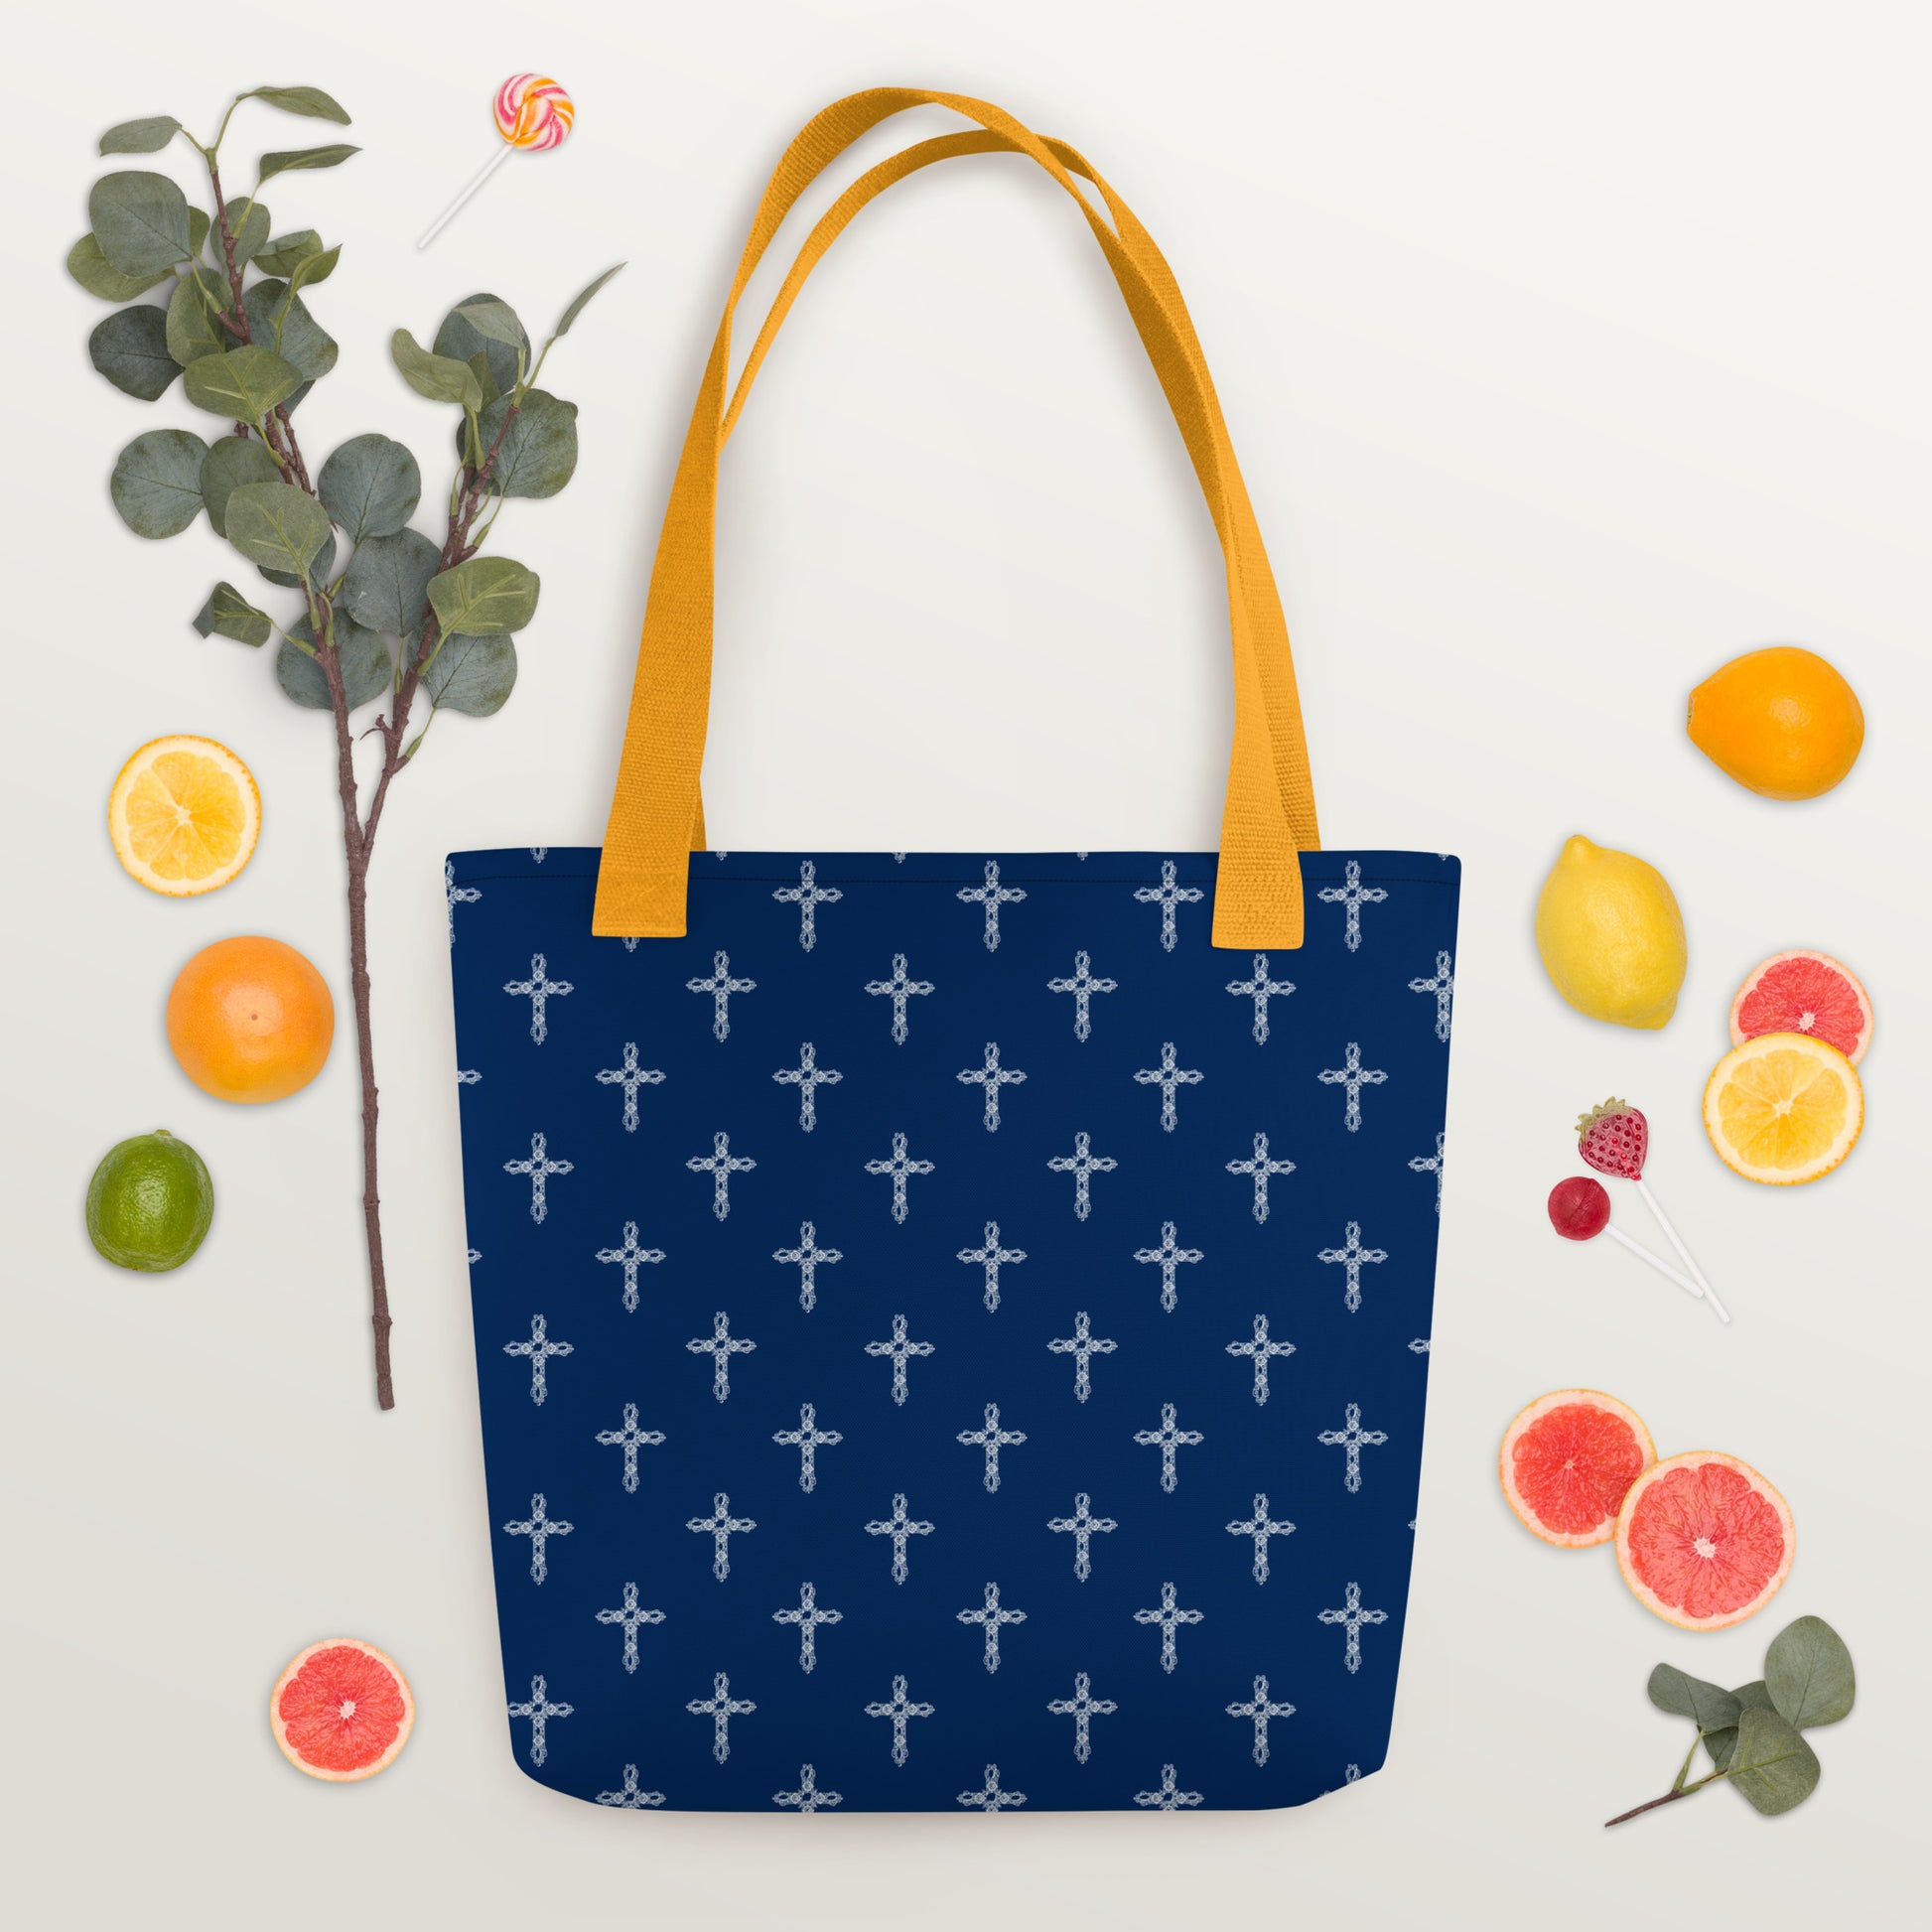 Navy blue purse or bag with white crosses on it and bright yellow handles, laying flat on a table with citrus fruit slices, strawberries, eucalyptus, and a sucker all laying on the white table around the purse.